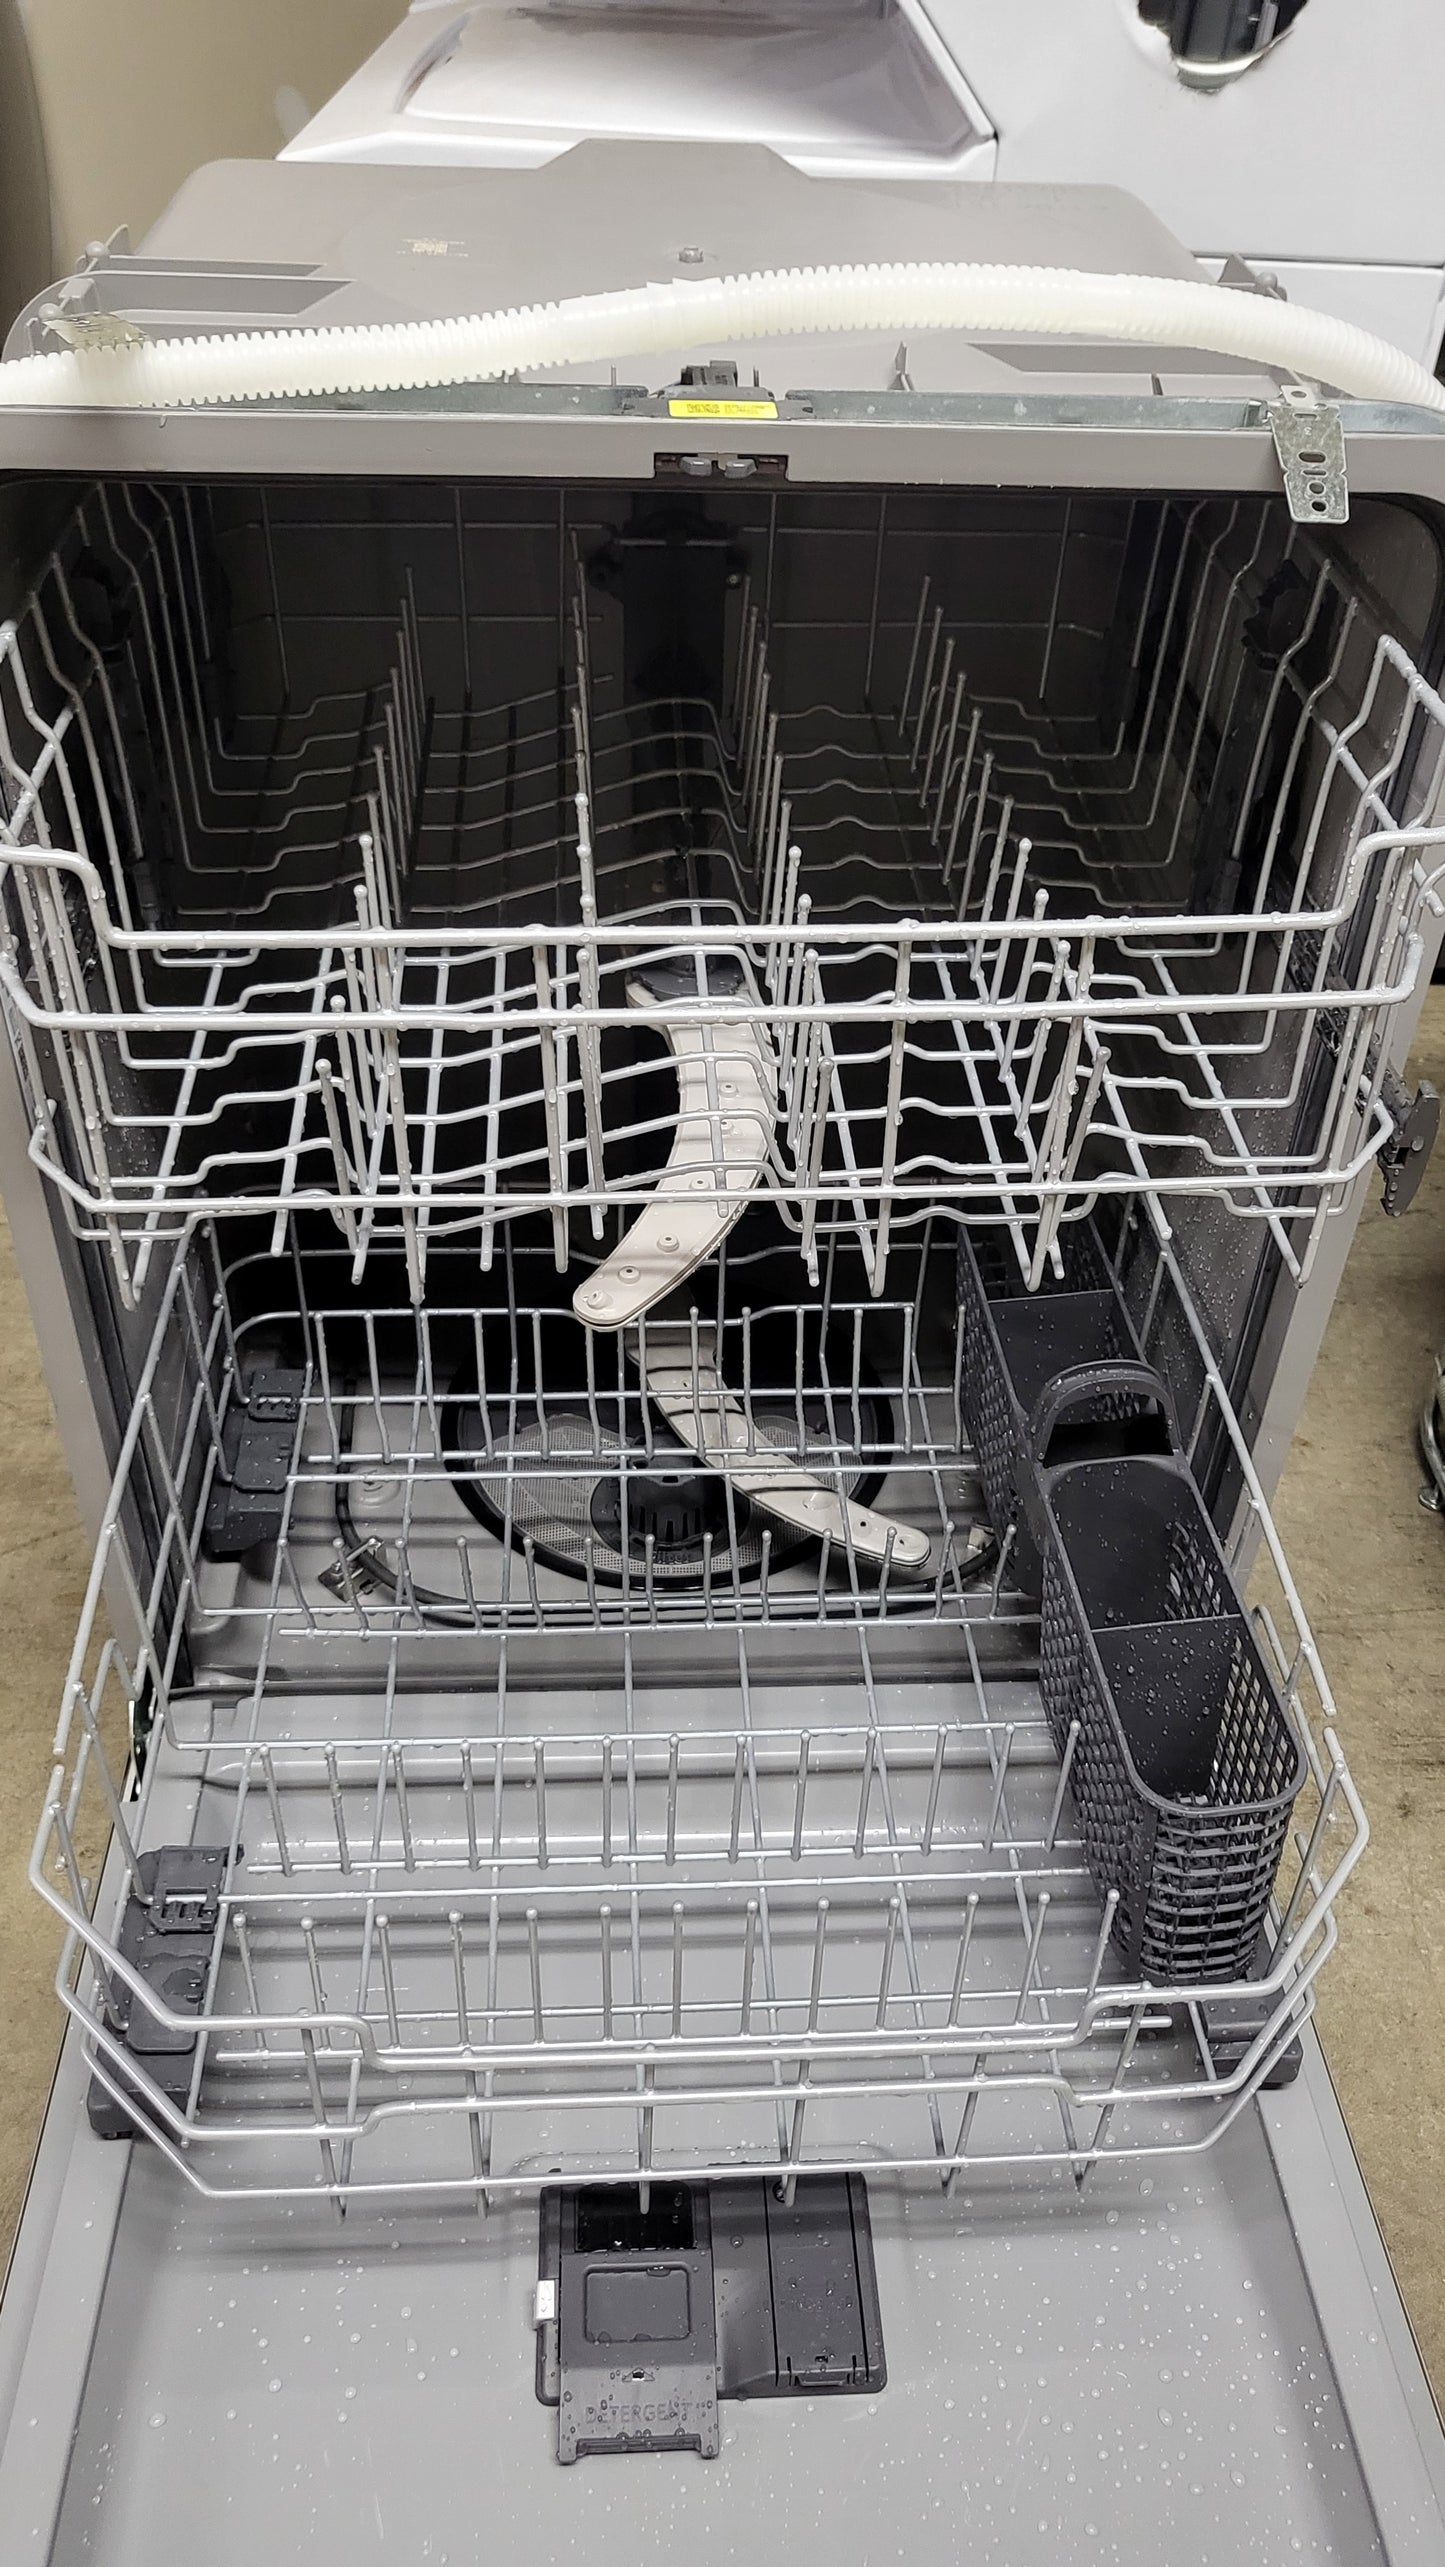 GE Top Control with Plastic Interior Dishwasher - GDT535PSRSS